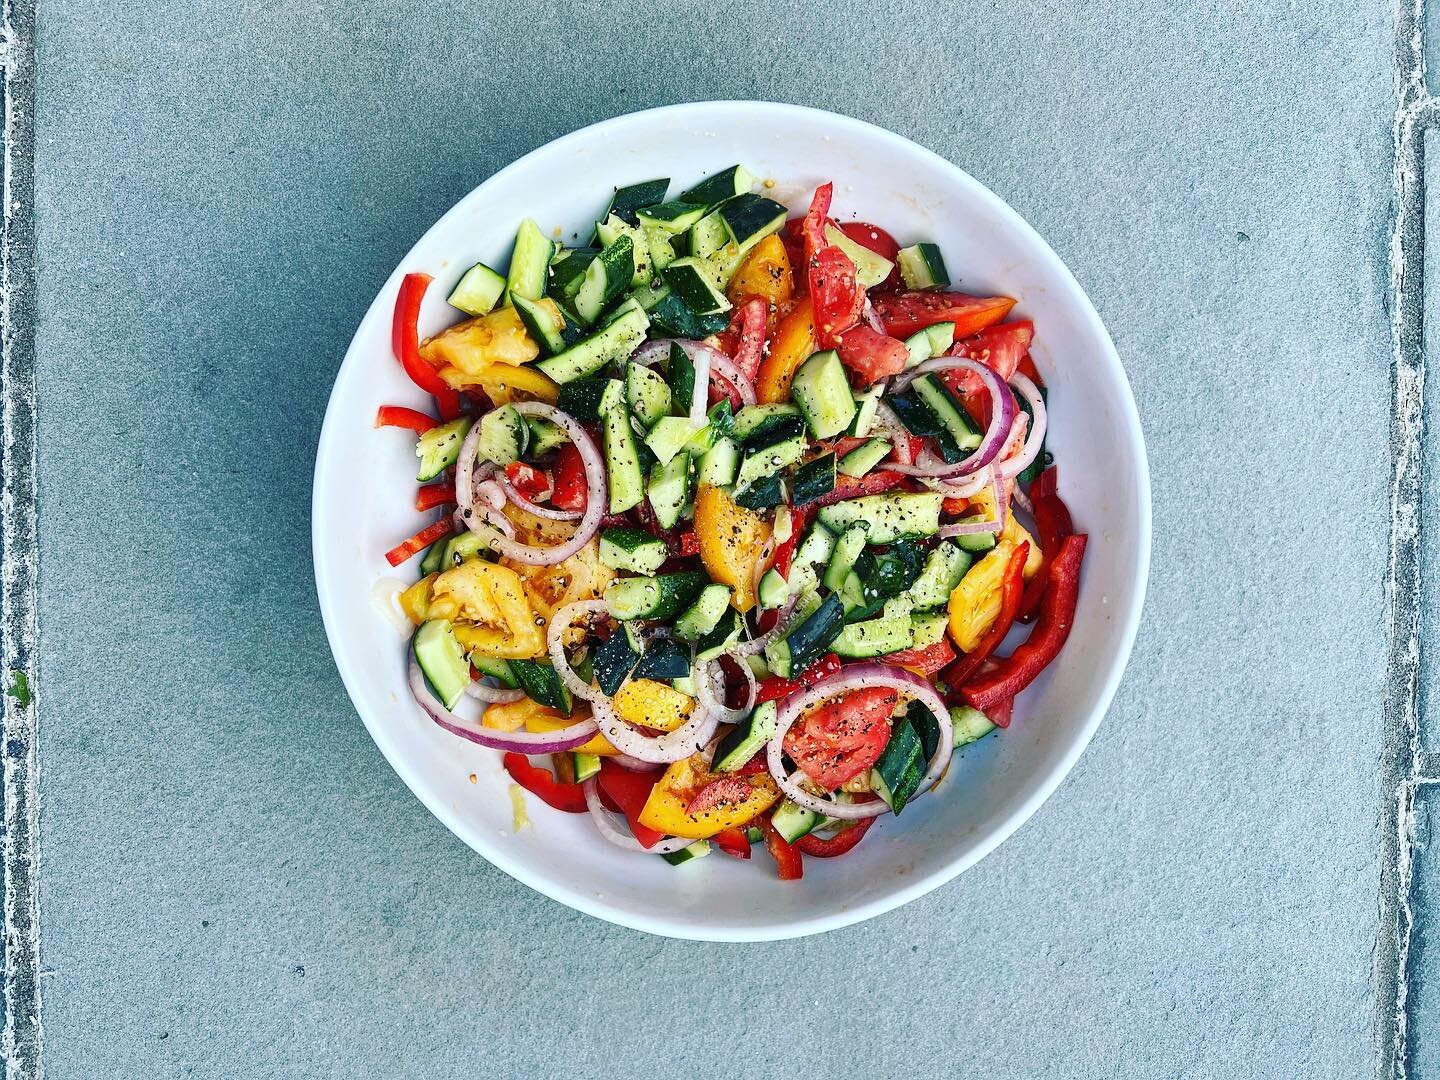 Tomatoes in bowls, you say @unsqgreenmarket? 4 Heirlooms, 1/2 of a large red onion, 8 smashed Kirby cucumbers, and 1 red bell pepper tossed with @californiaoliveranch olive oil, lemon, salt, and pepper